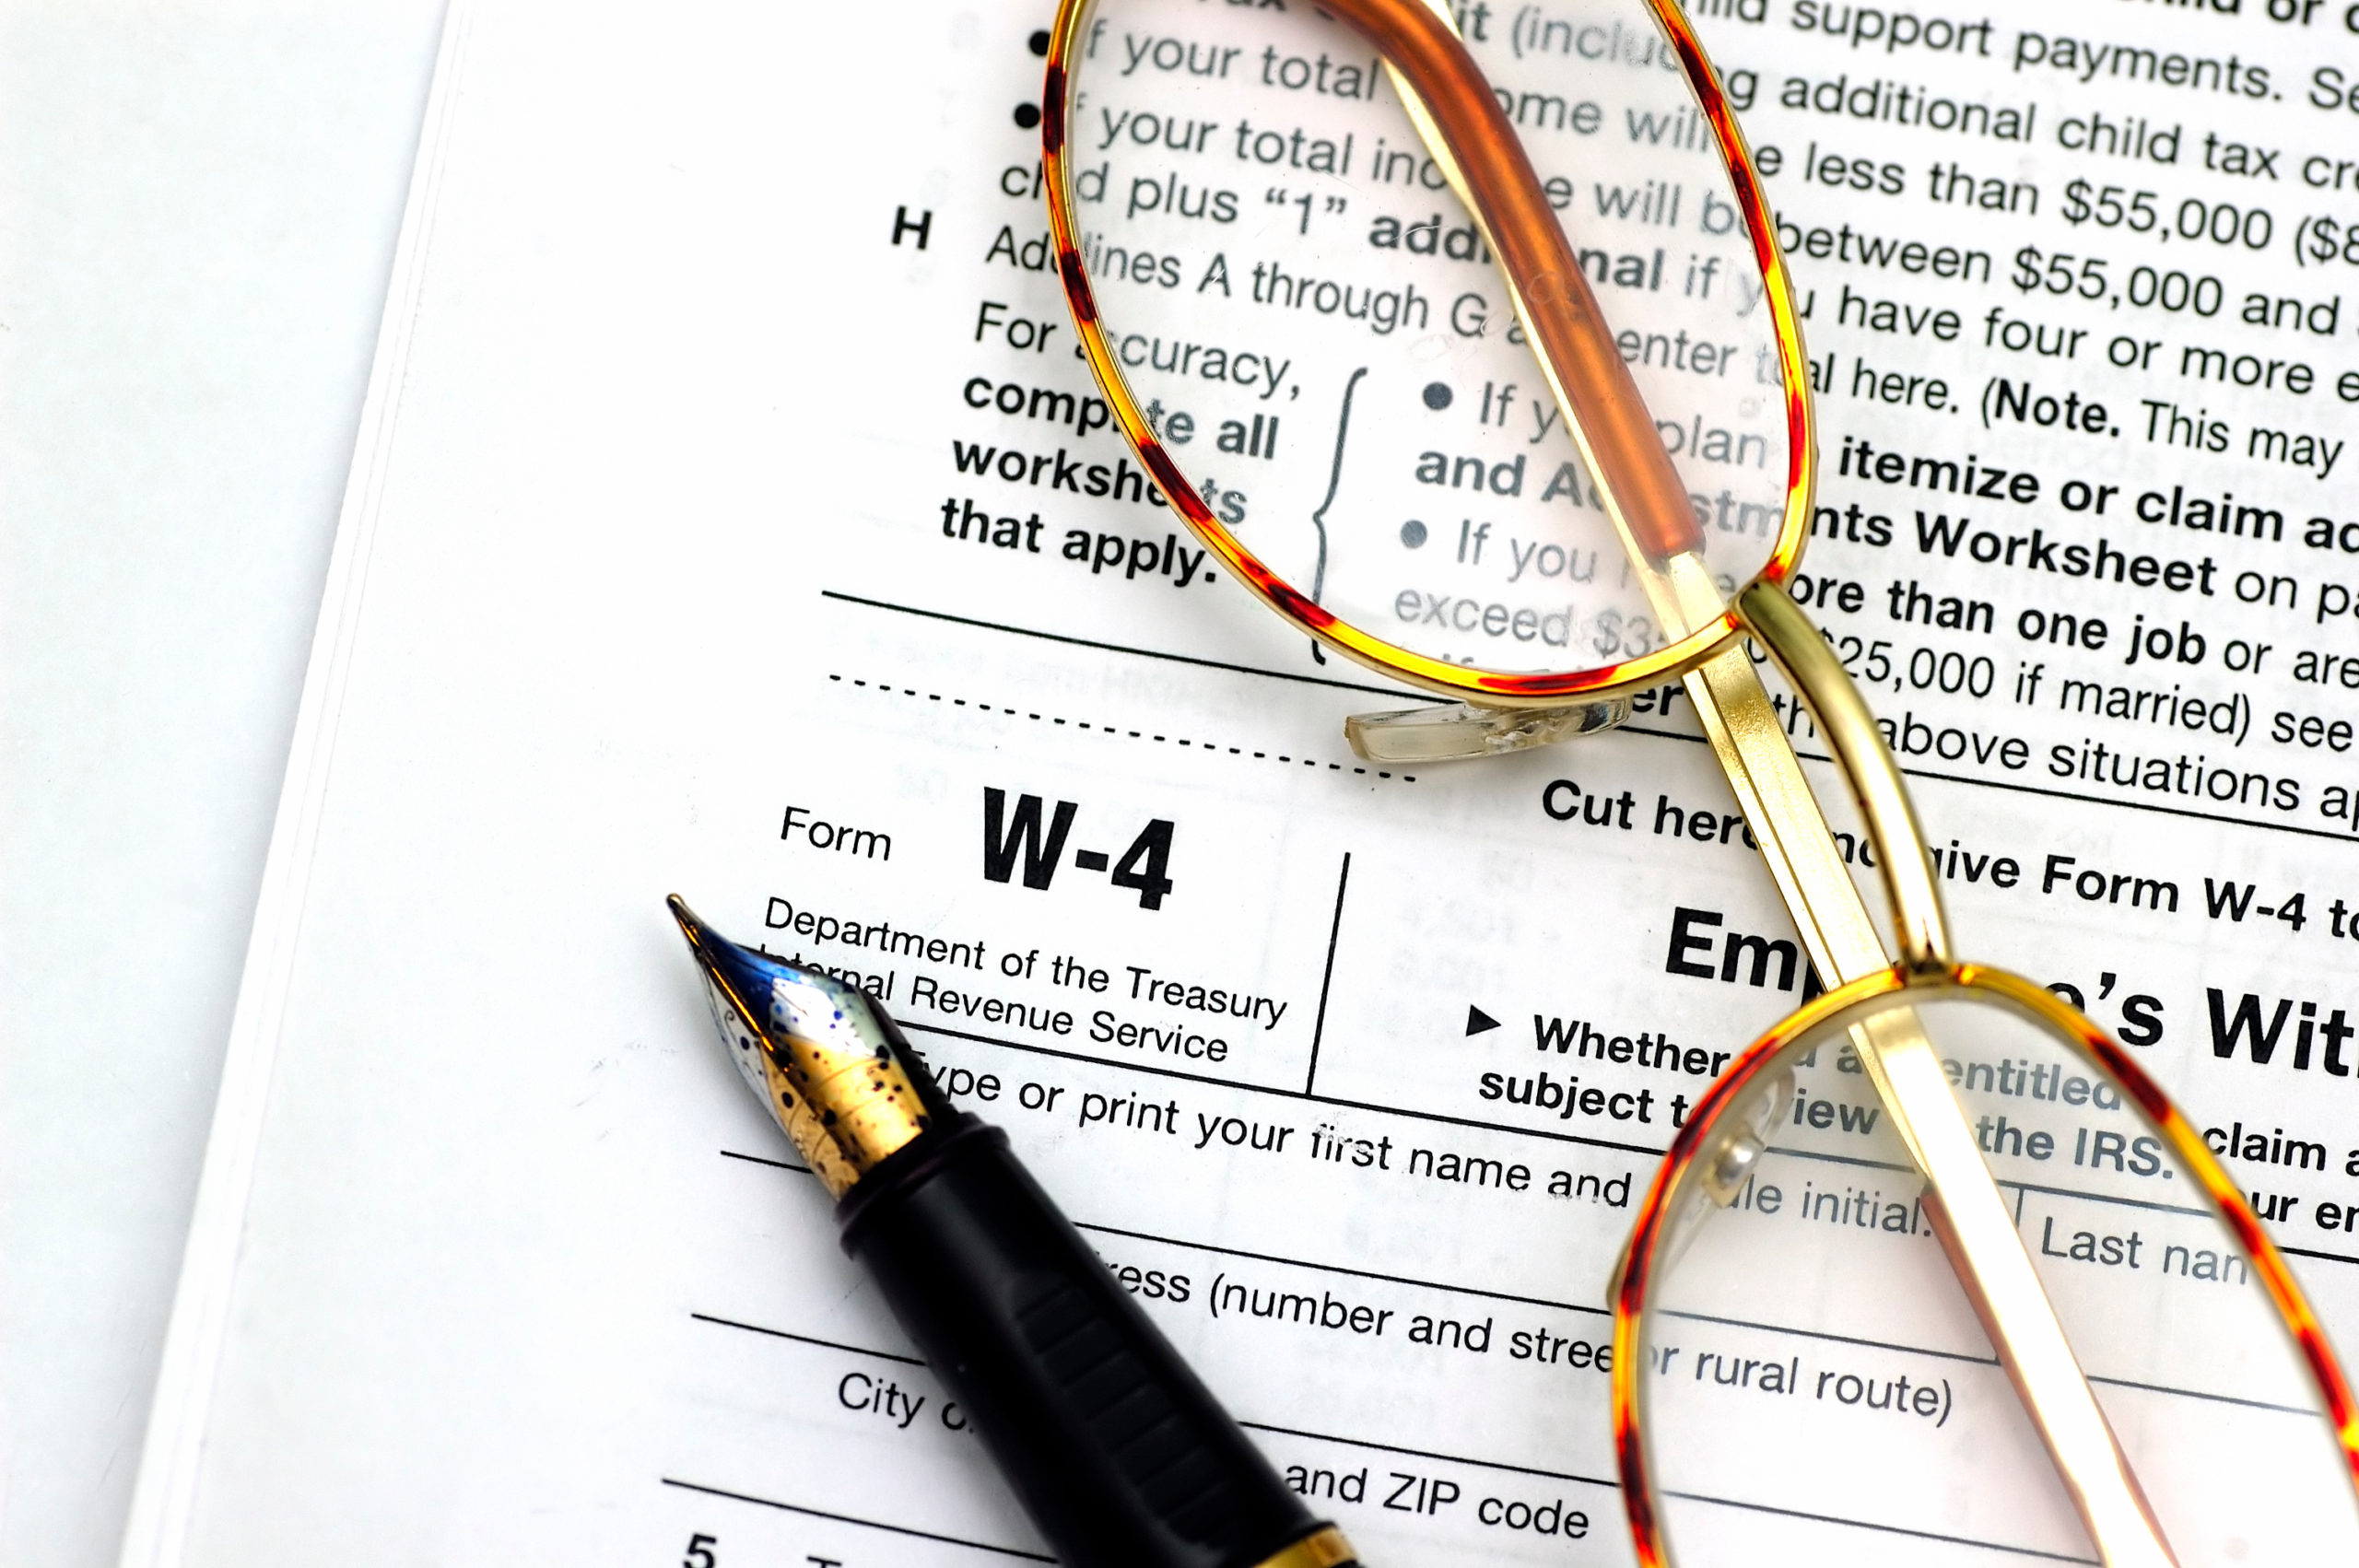 W-4 form, with a pen and glasses sitting on top.